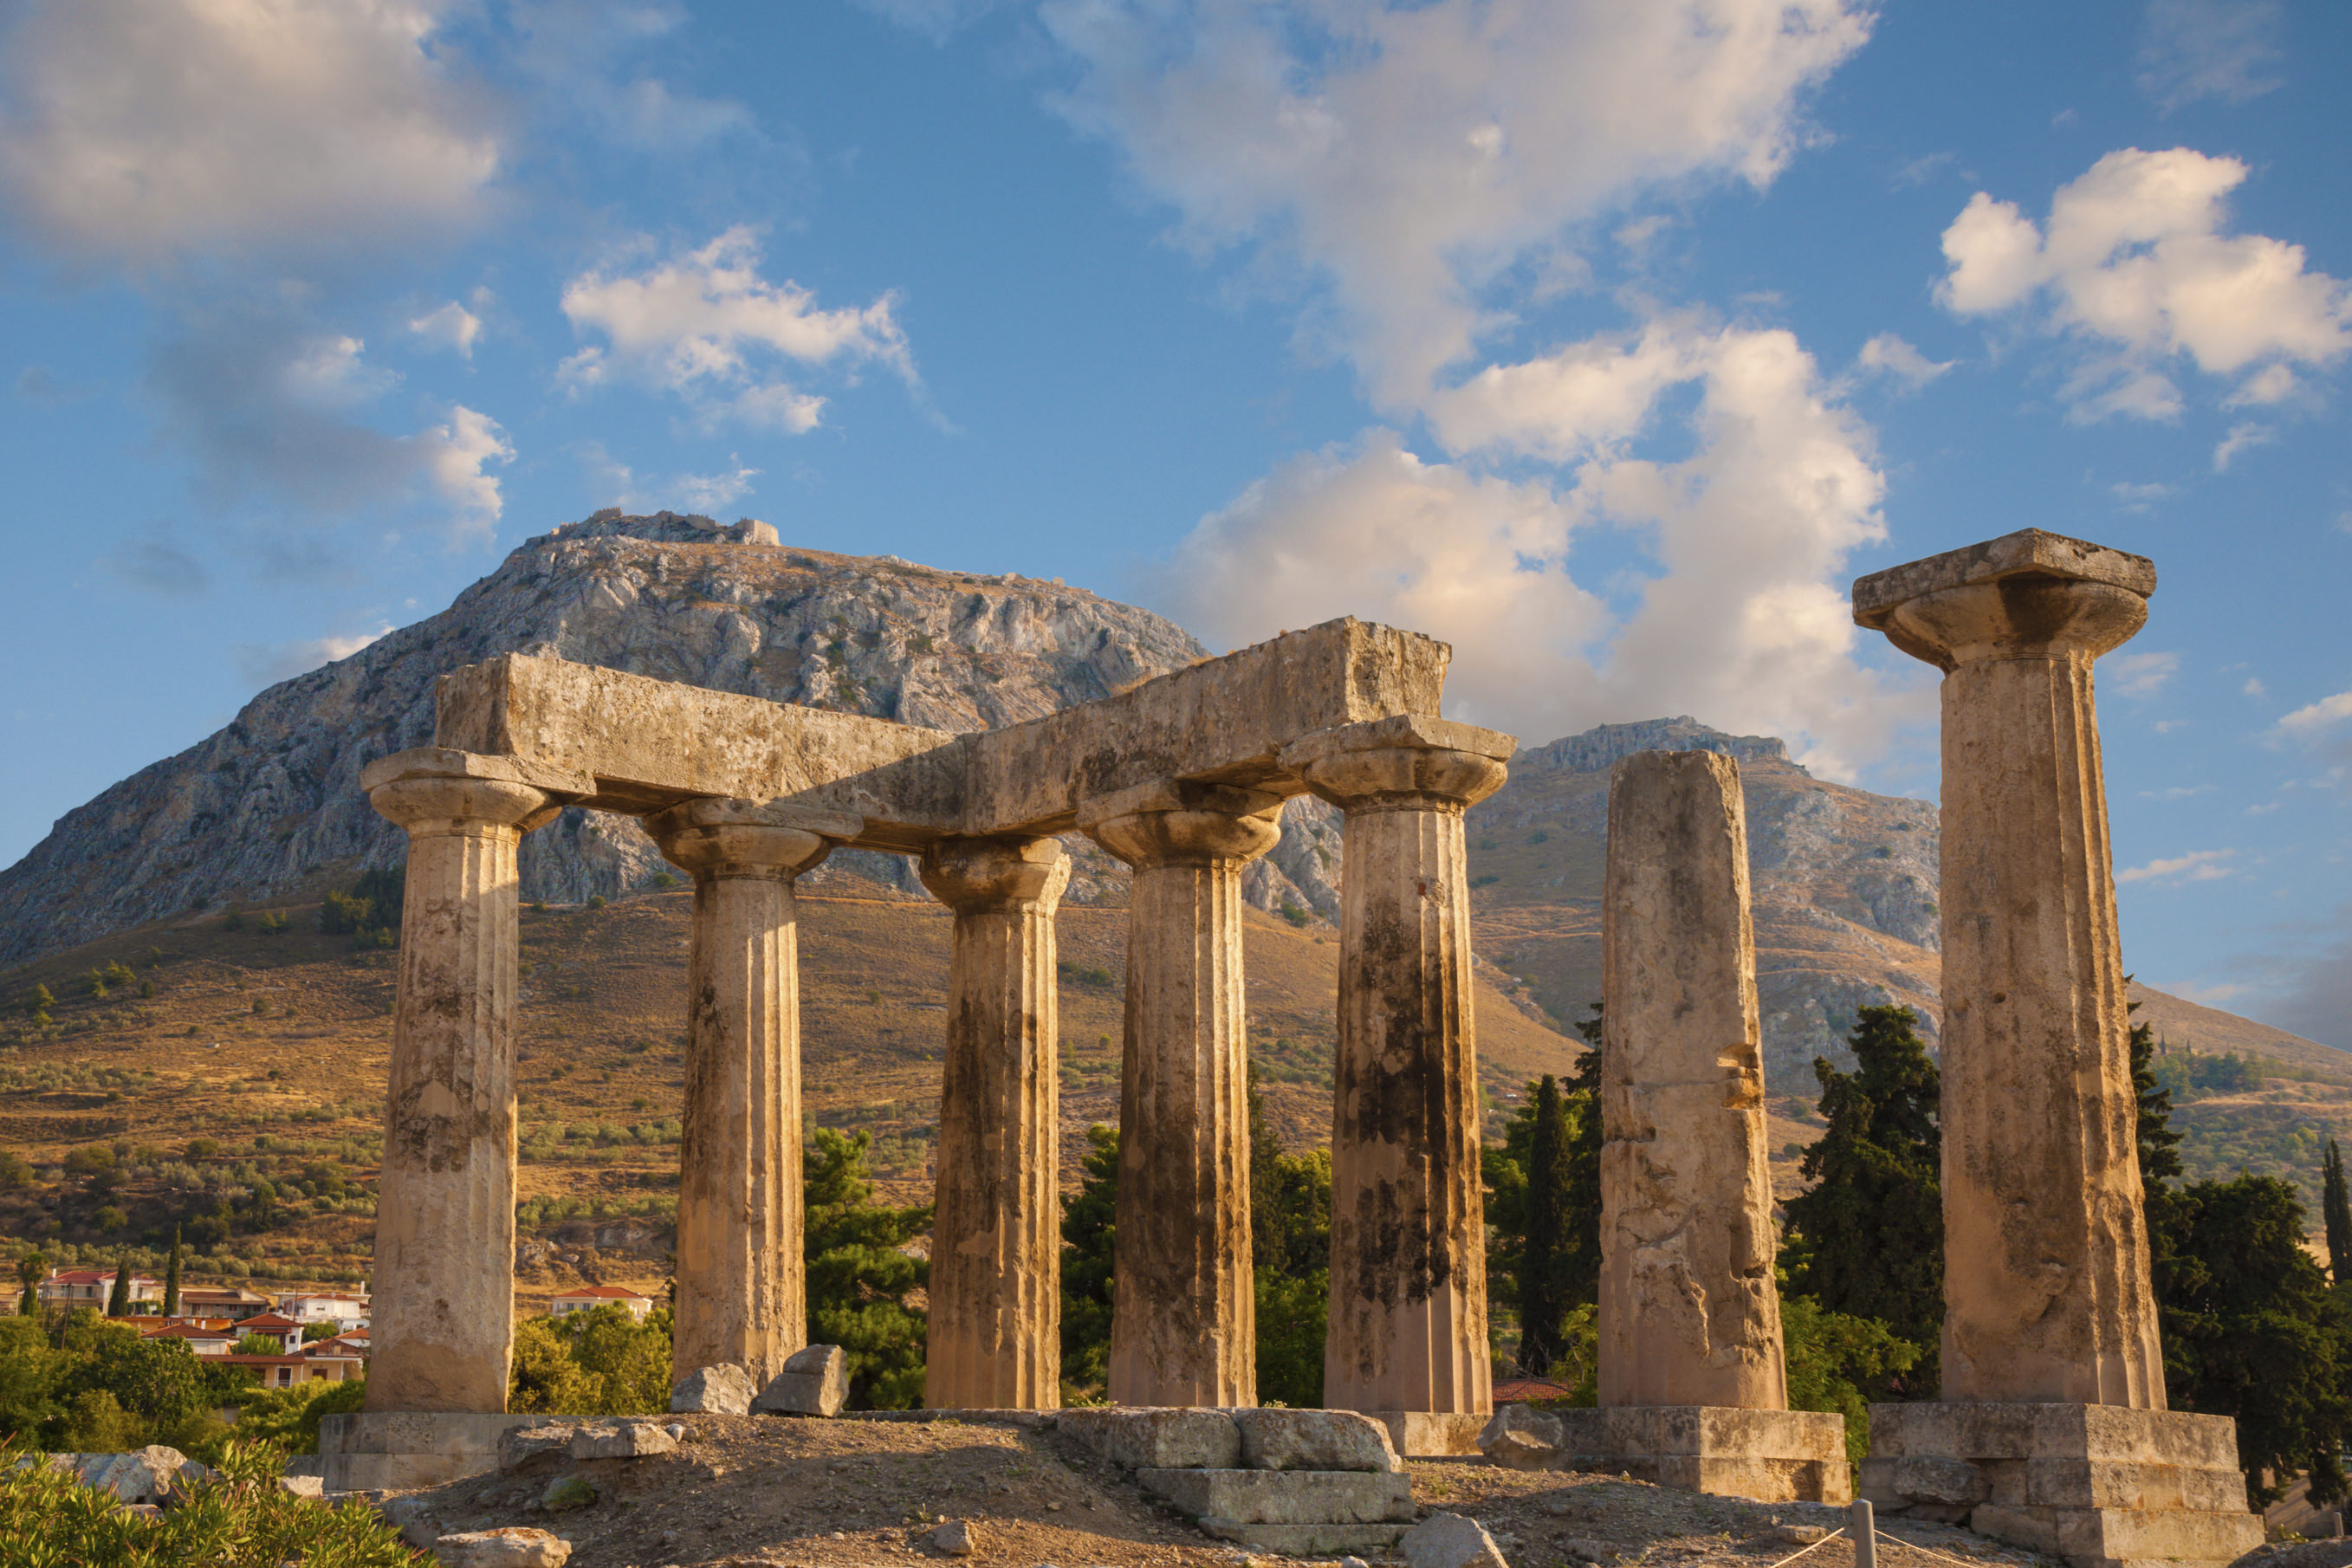 Ruins of Appollo temple with fortress at back in ancient Corinth, Greece